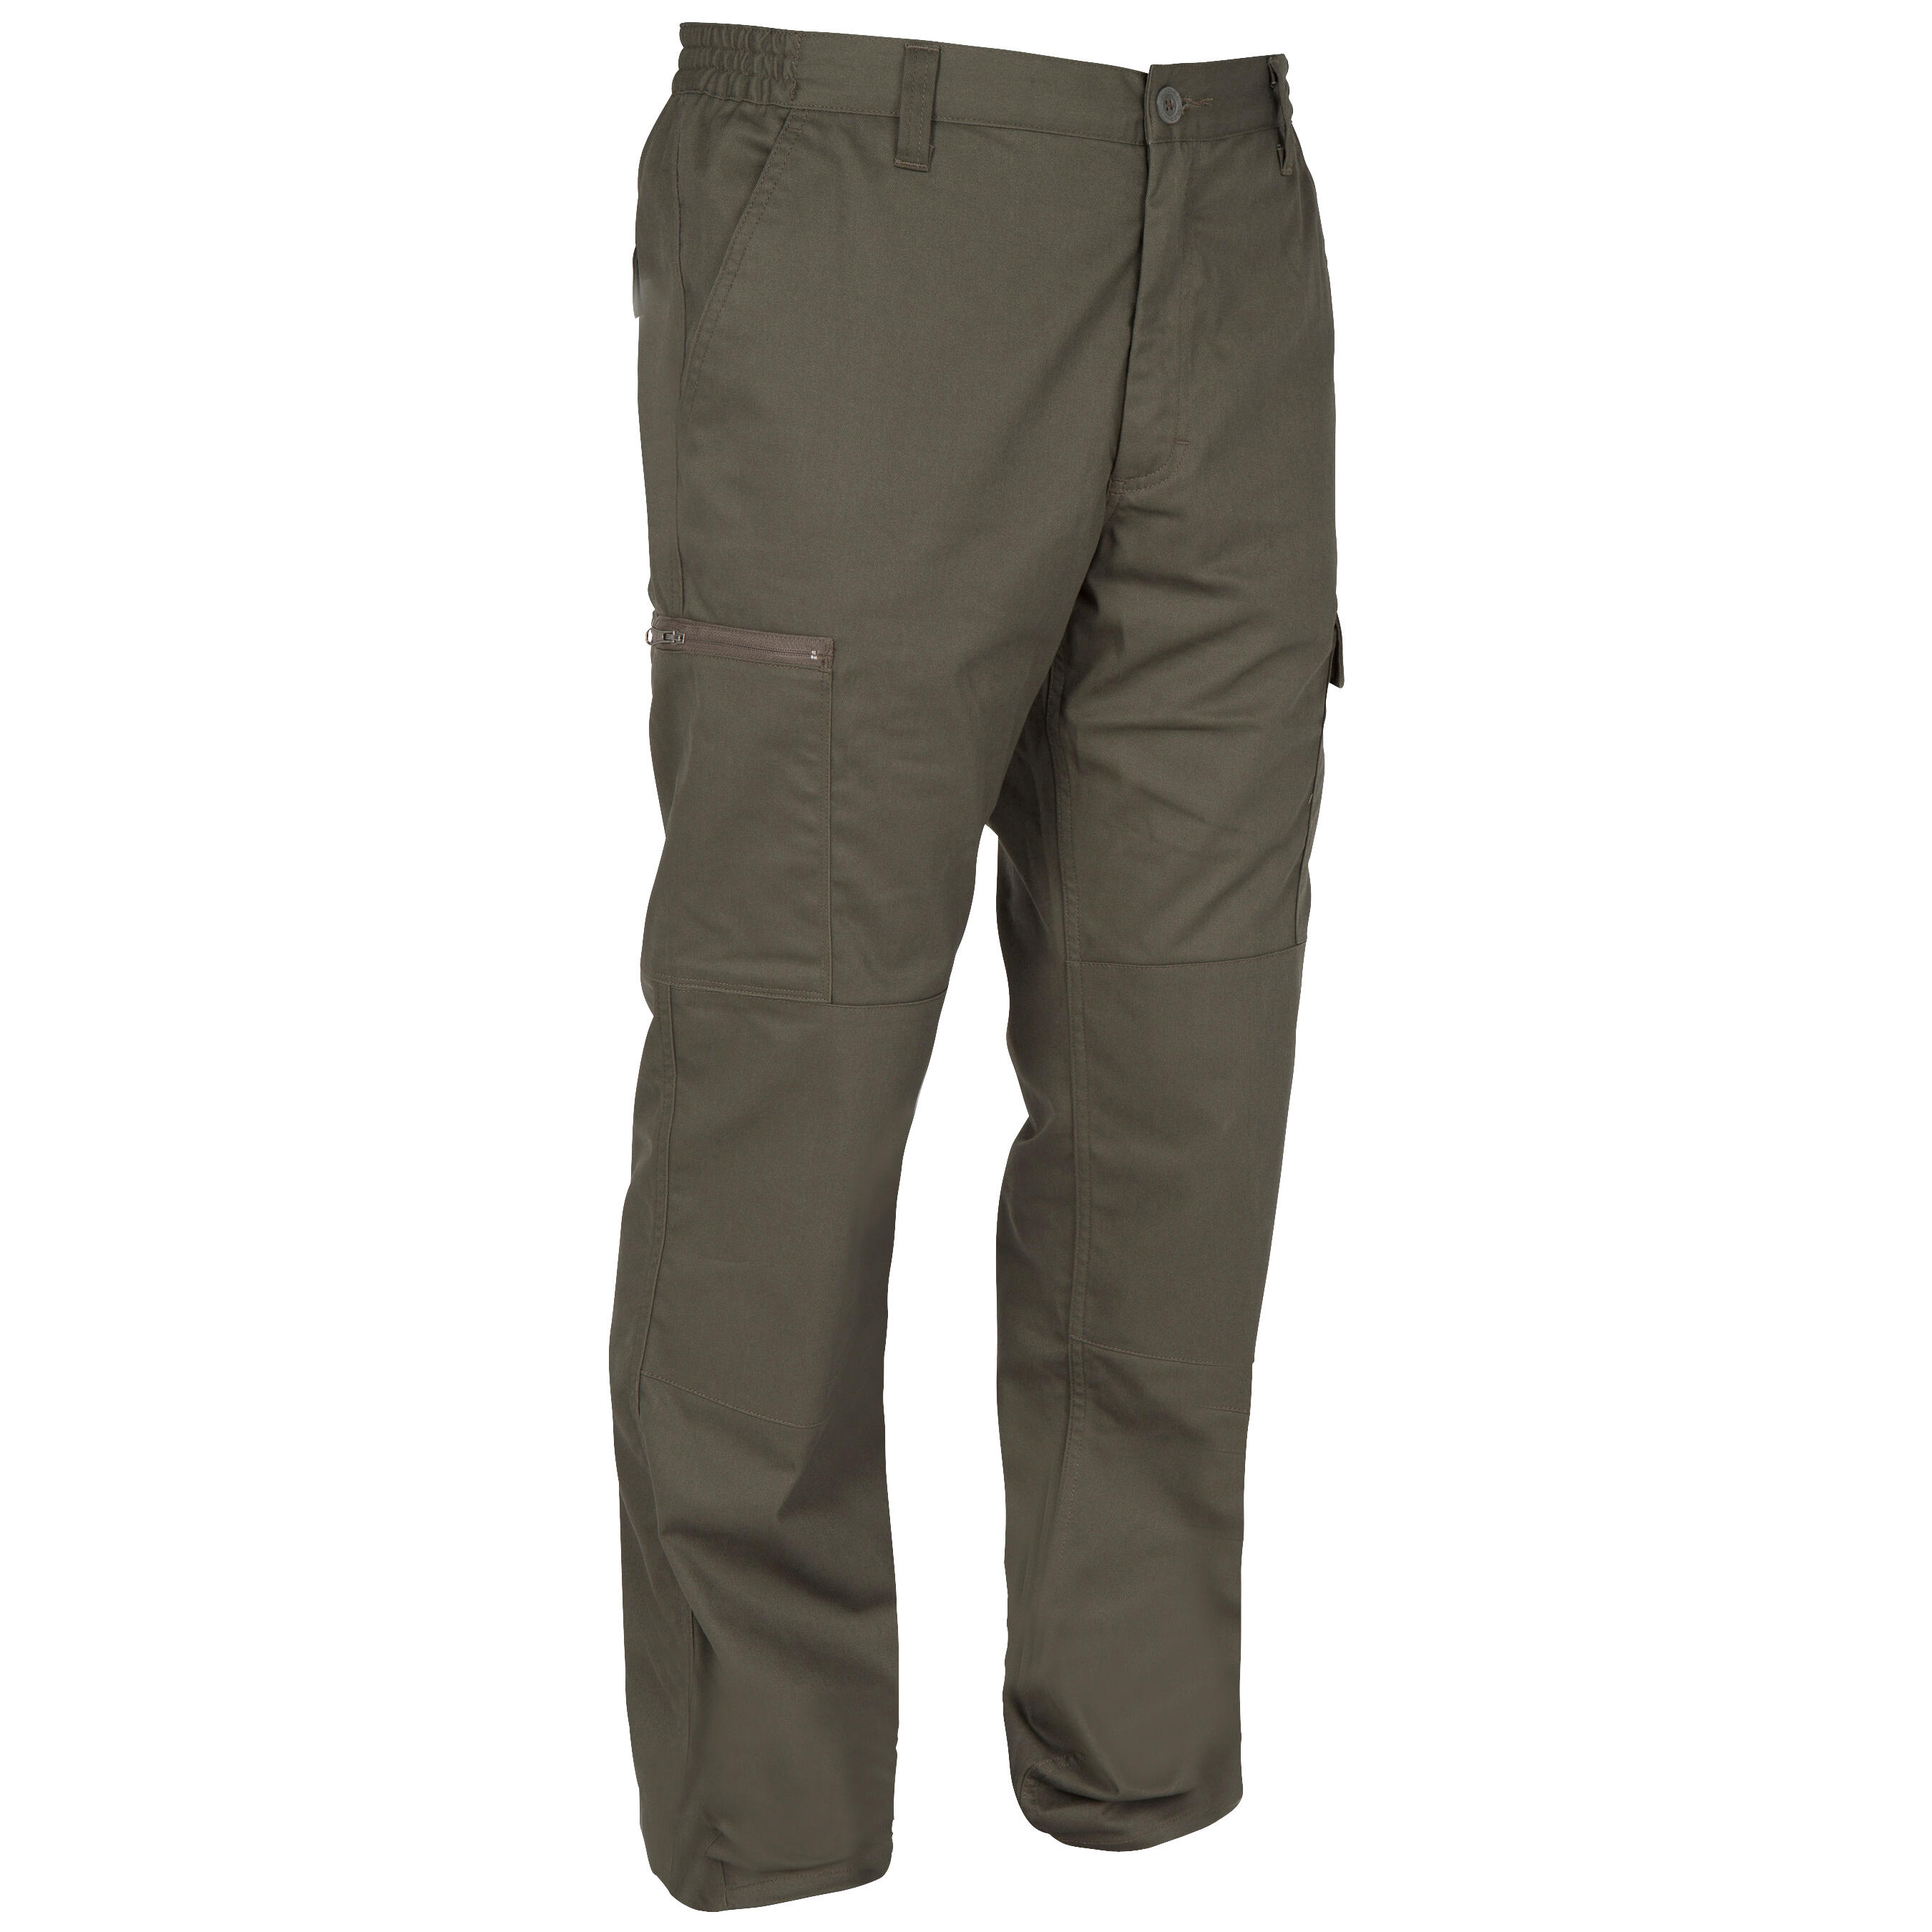 20 Best Cargo Pants for Men in 2023 Tested by Style Experts